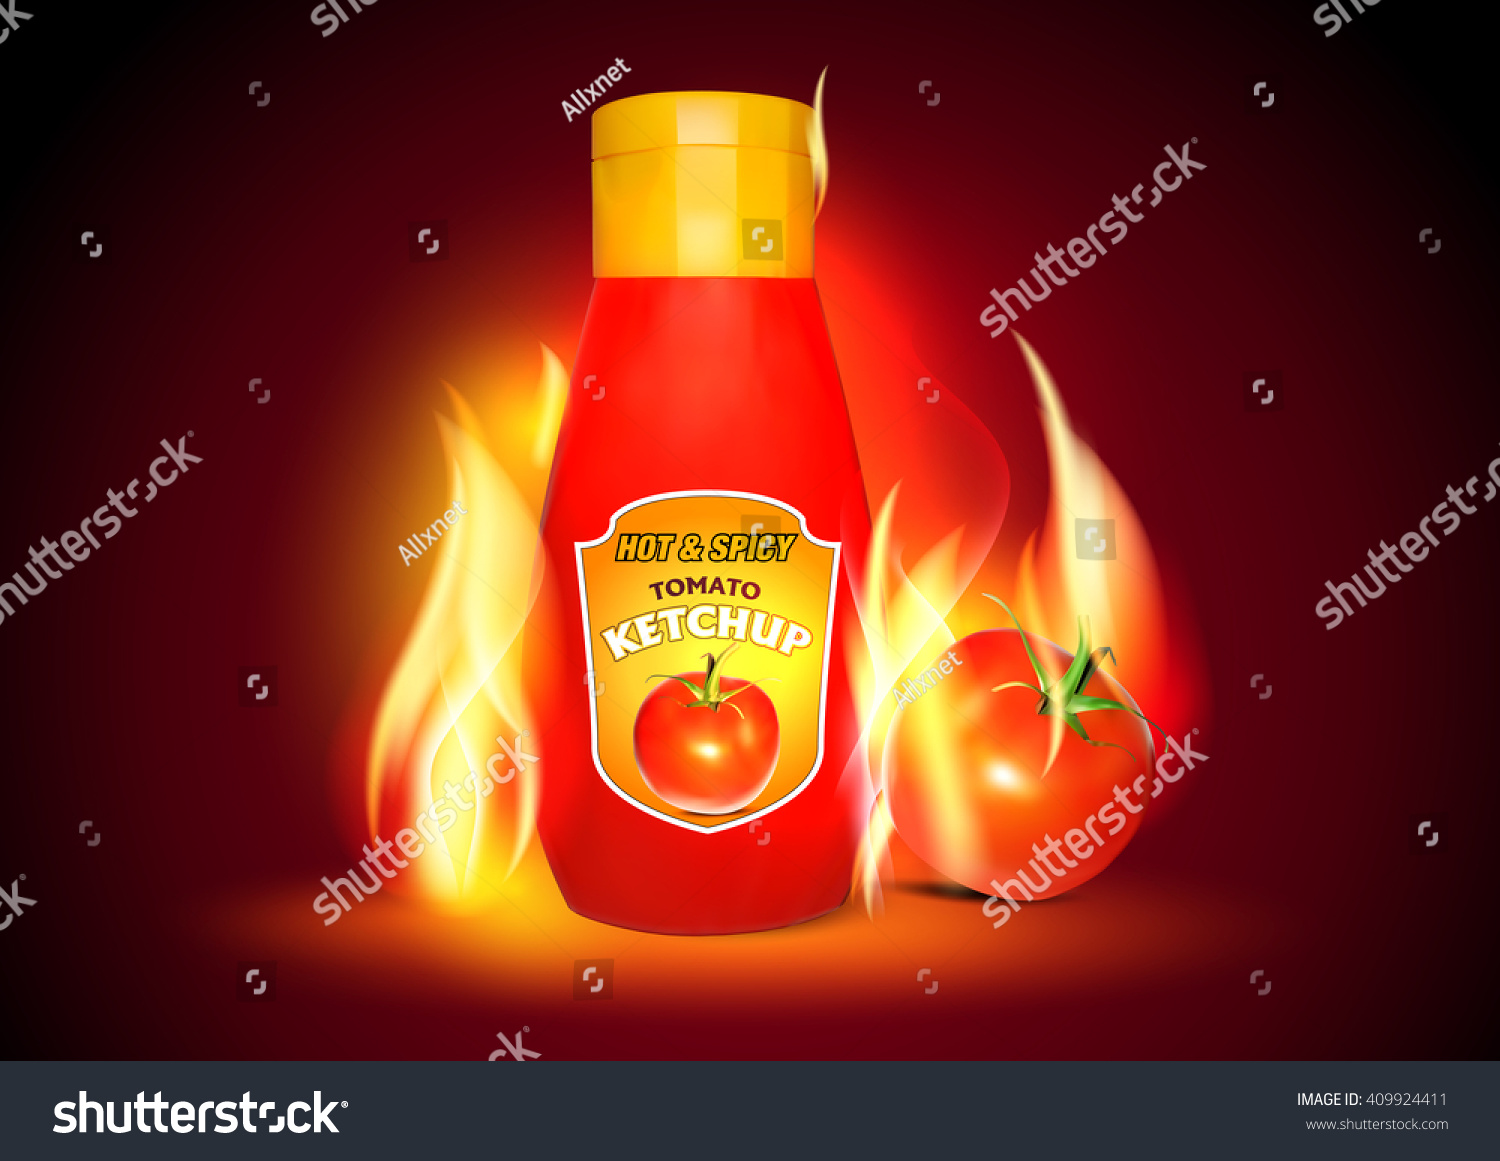 stock-vector-hot-and-spicy-tomato-ketchu